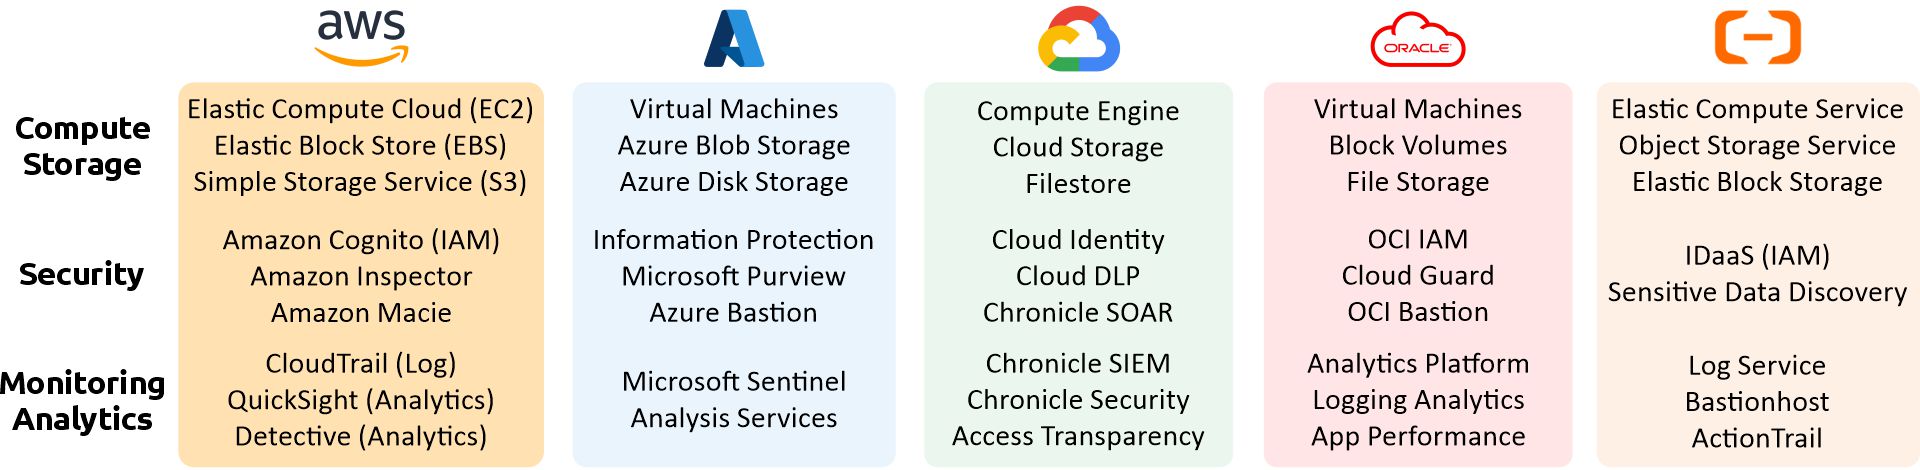 aws azure google oracle alibaba cloud compute security services